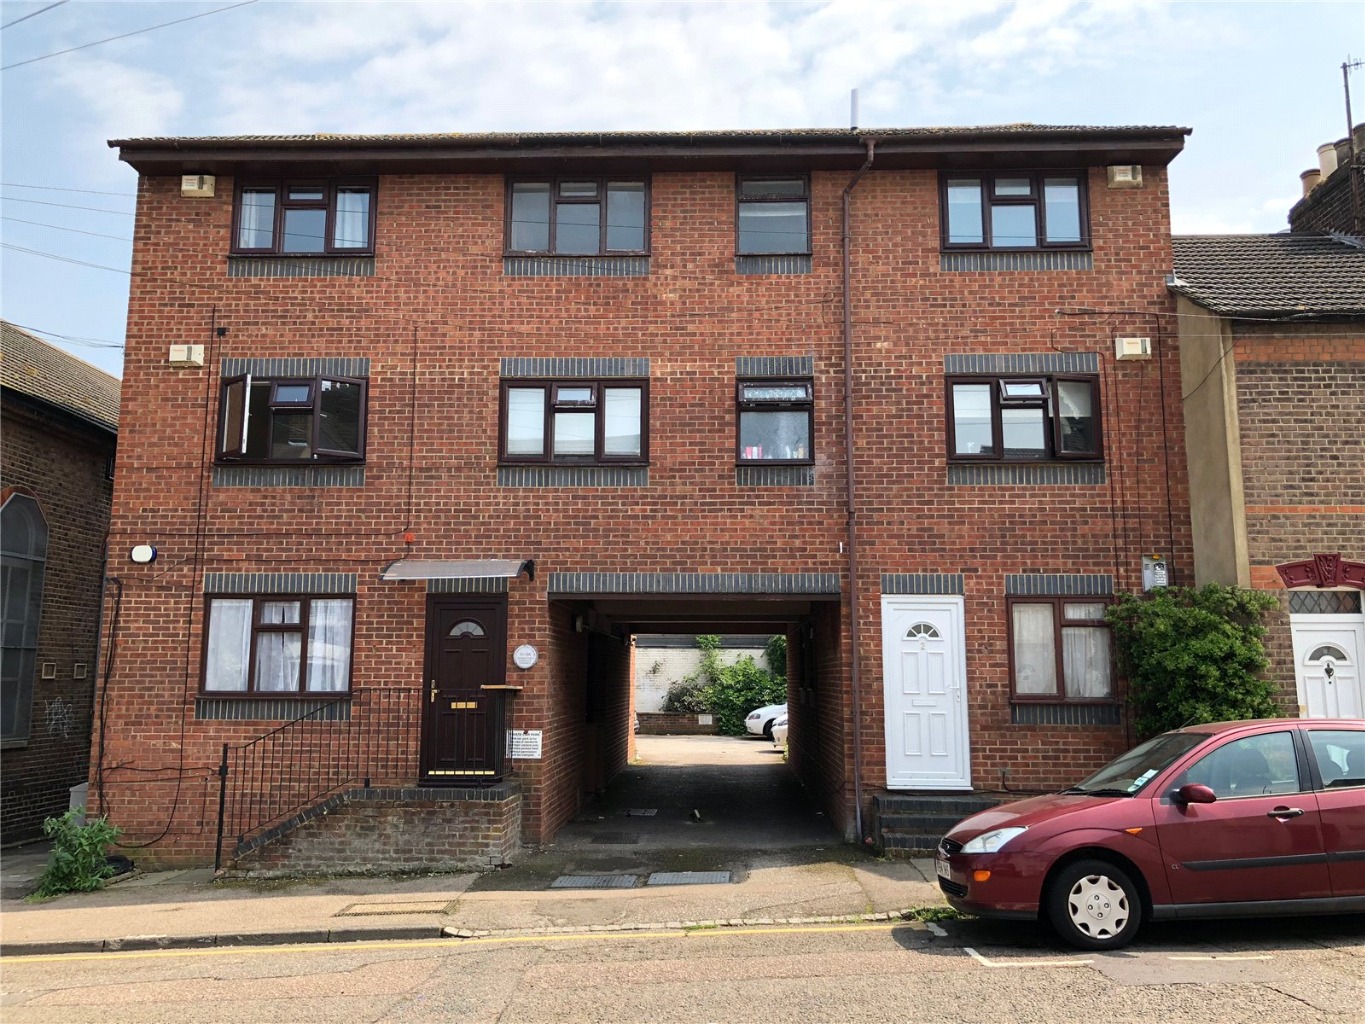 Great investment for a first purchase is this one-bedroom town centre apartment benefitting from electric heating, new double-glazed windows, gated off road parking and a totally separate kitchen.